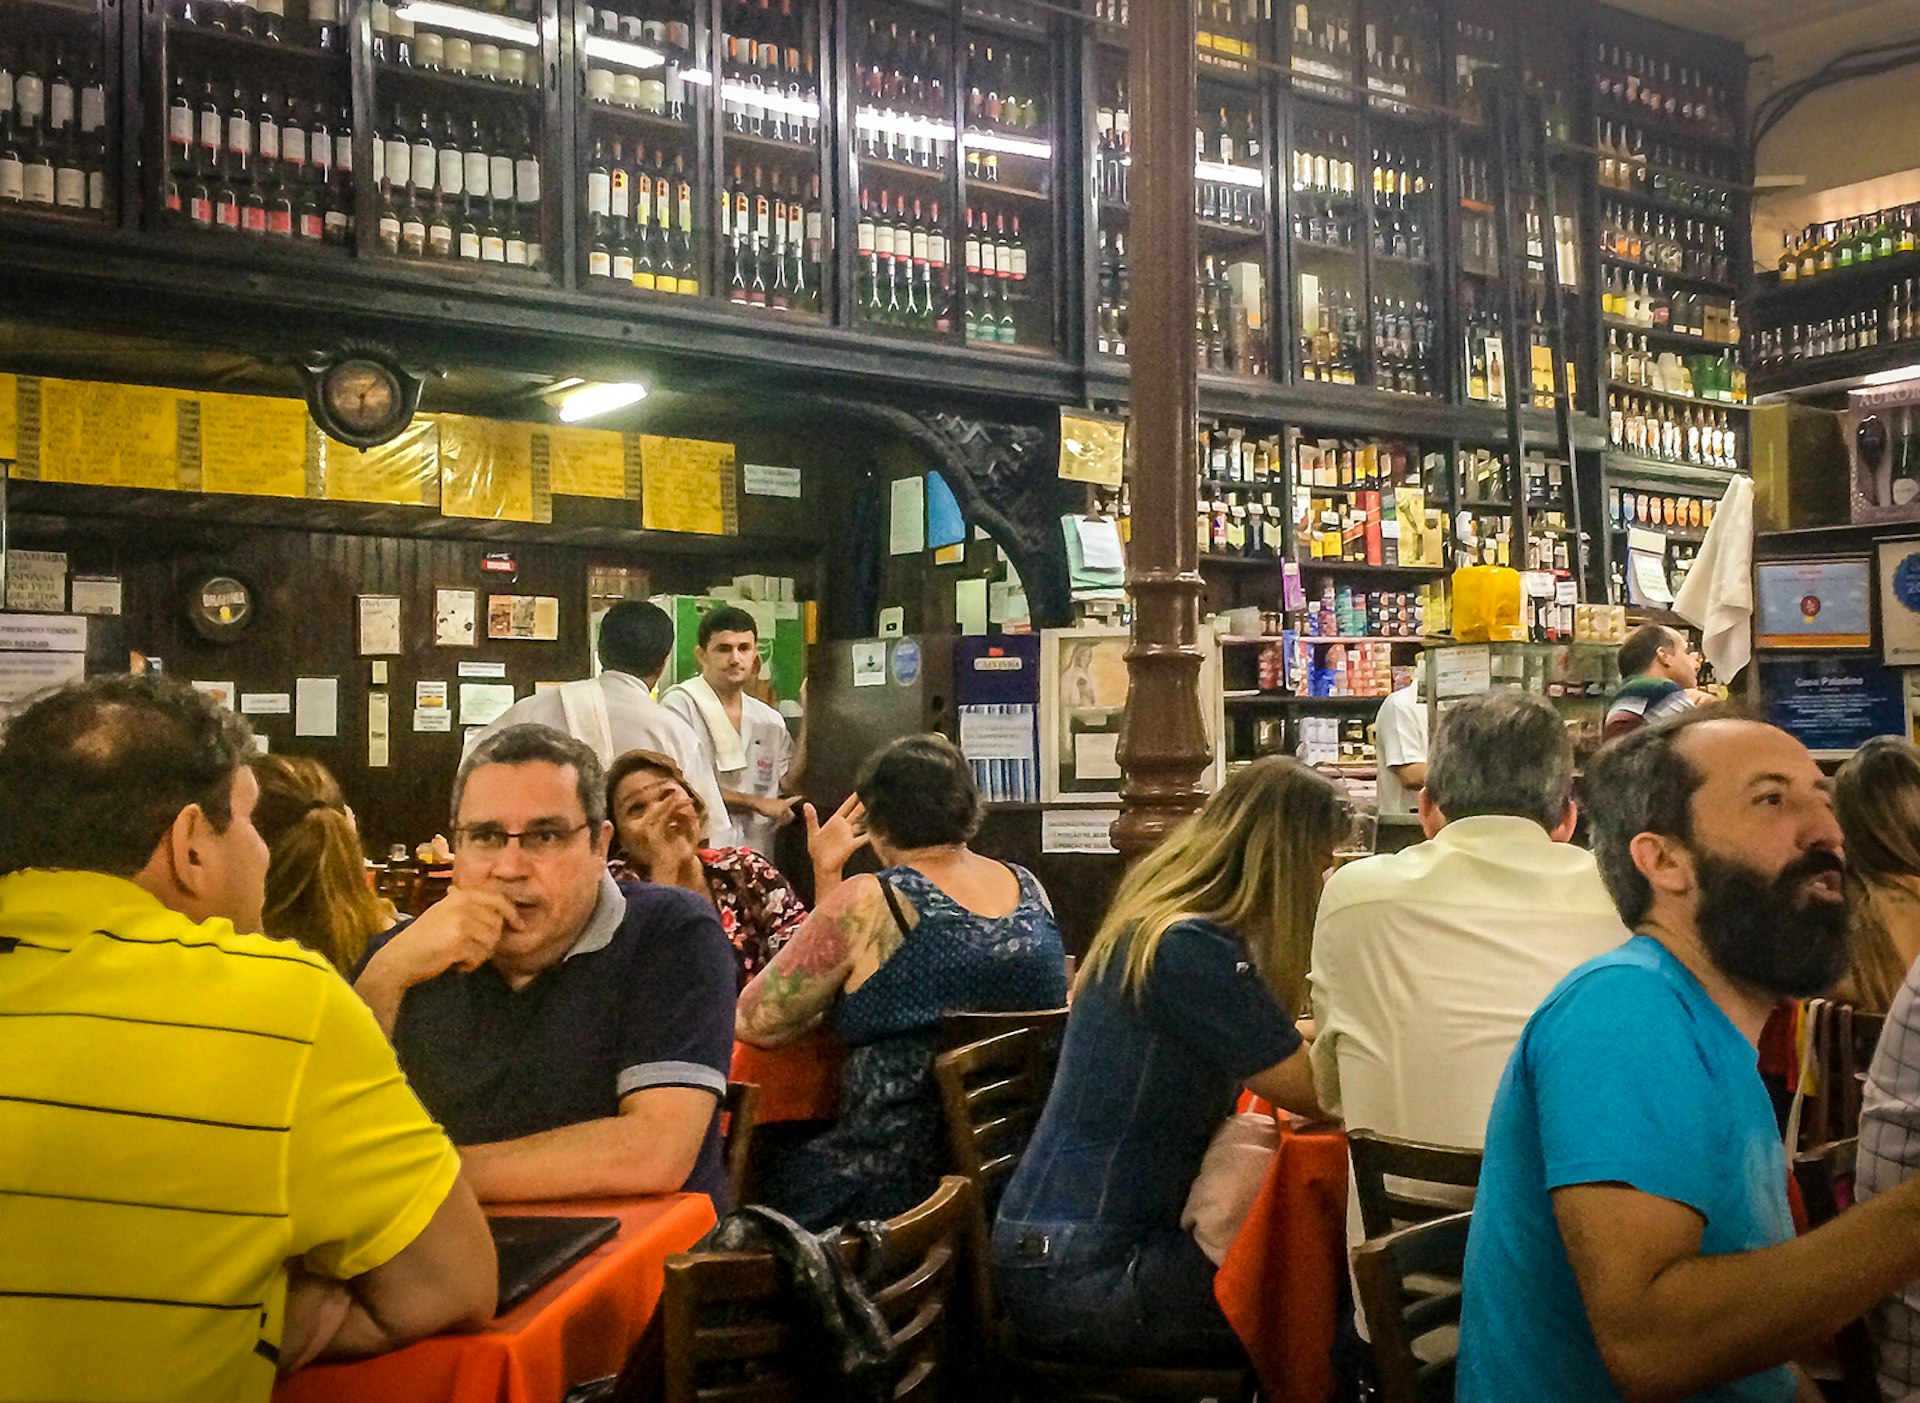 A crowded bar with a wall of dark wooden shelves lined with cachaca bottles